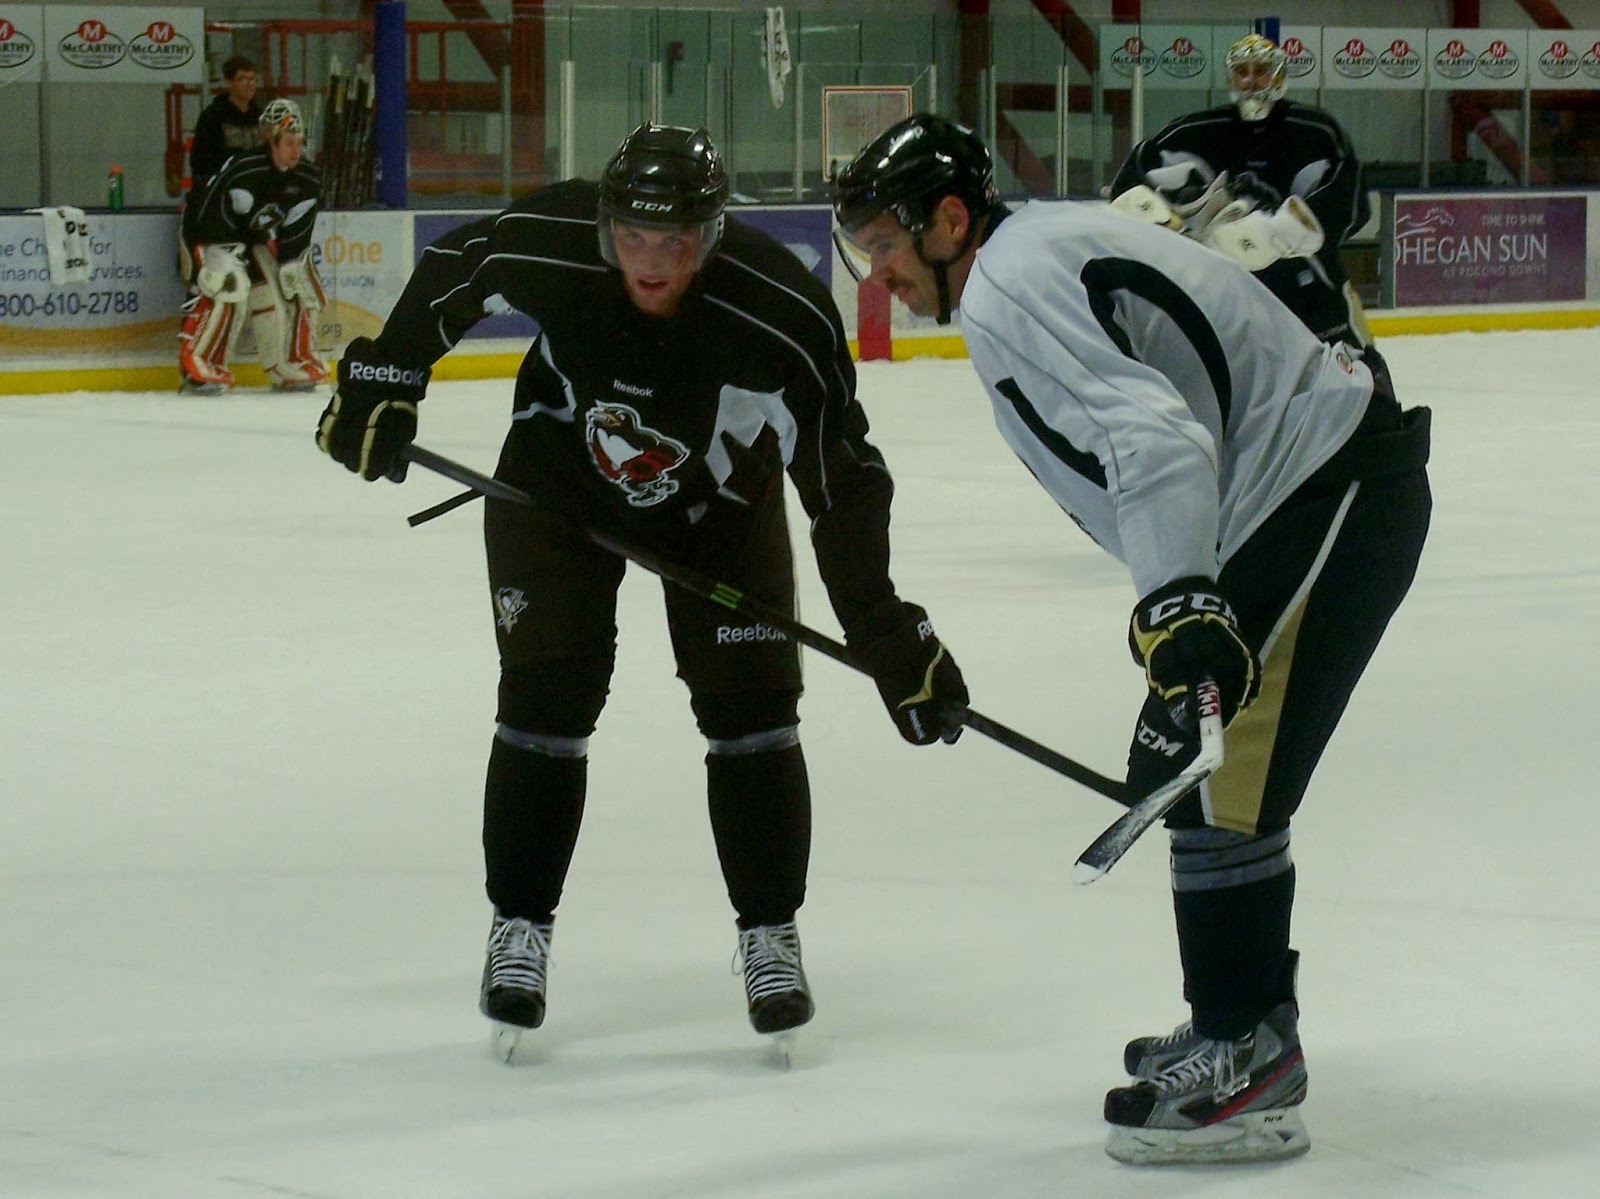 PITTSBURGH ASSIGNS 11 TO WBS TRAINING CAMP